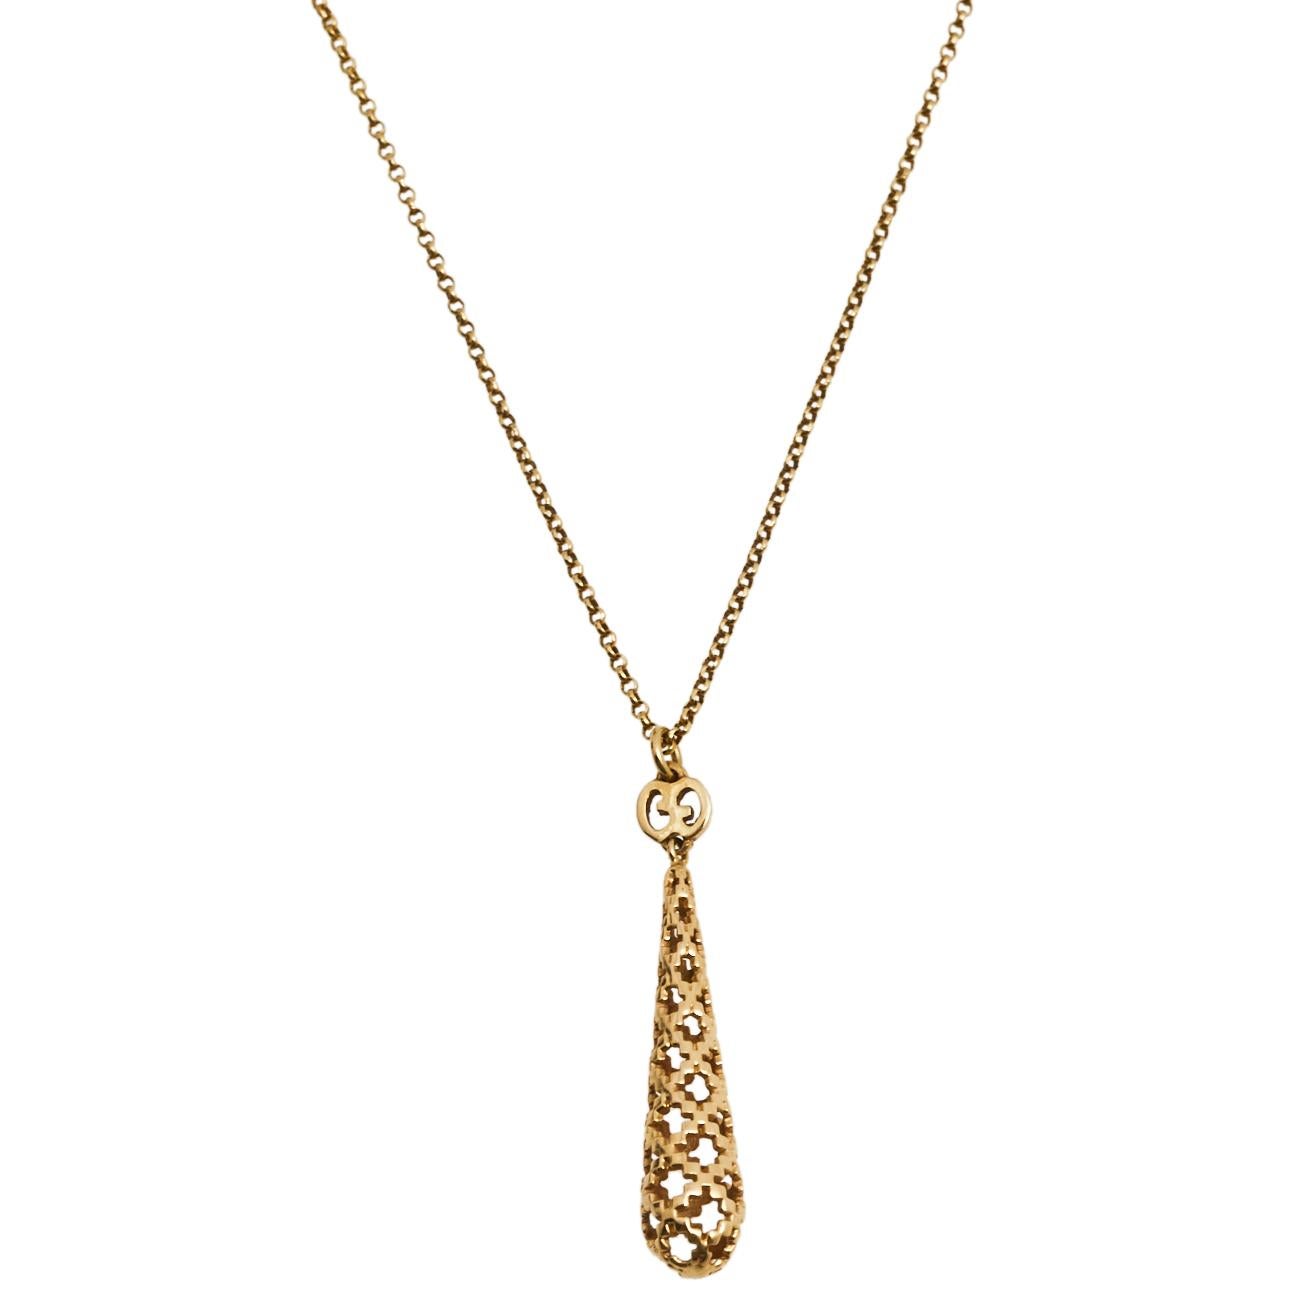 Featuring the Diamantissima pattern on the drop-shaped pendant that comes accompanied by a GG logo at its tip, this Gucci necklace is delicate and elegant. Crafted from 18k yellow gold, it comes supported with a sleek chain and a lobster